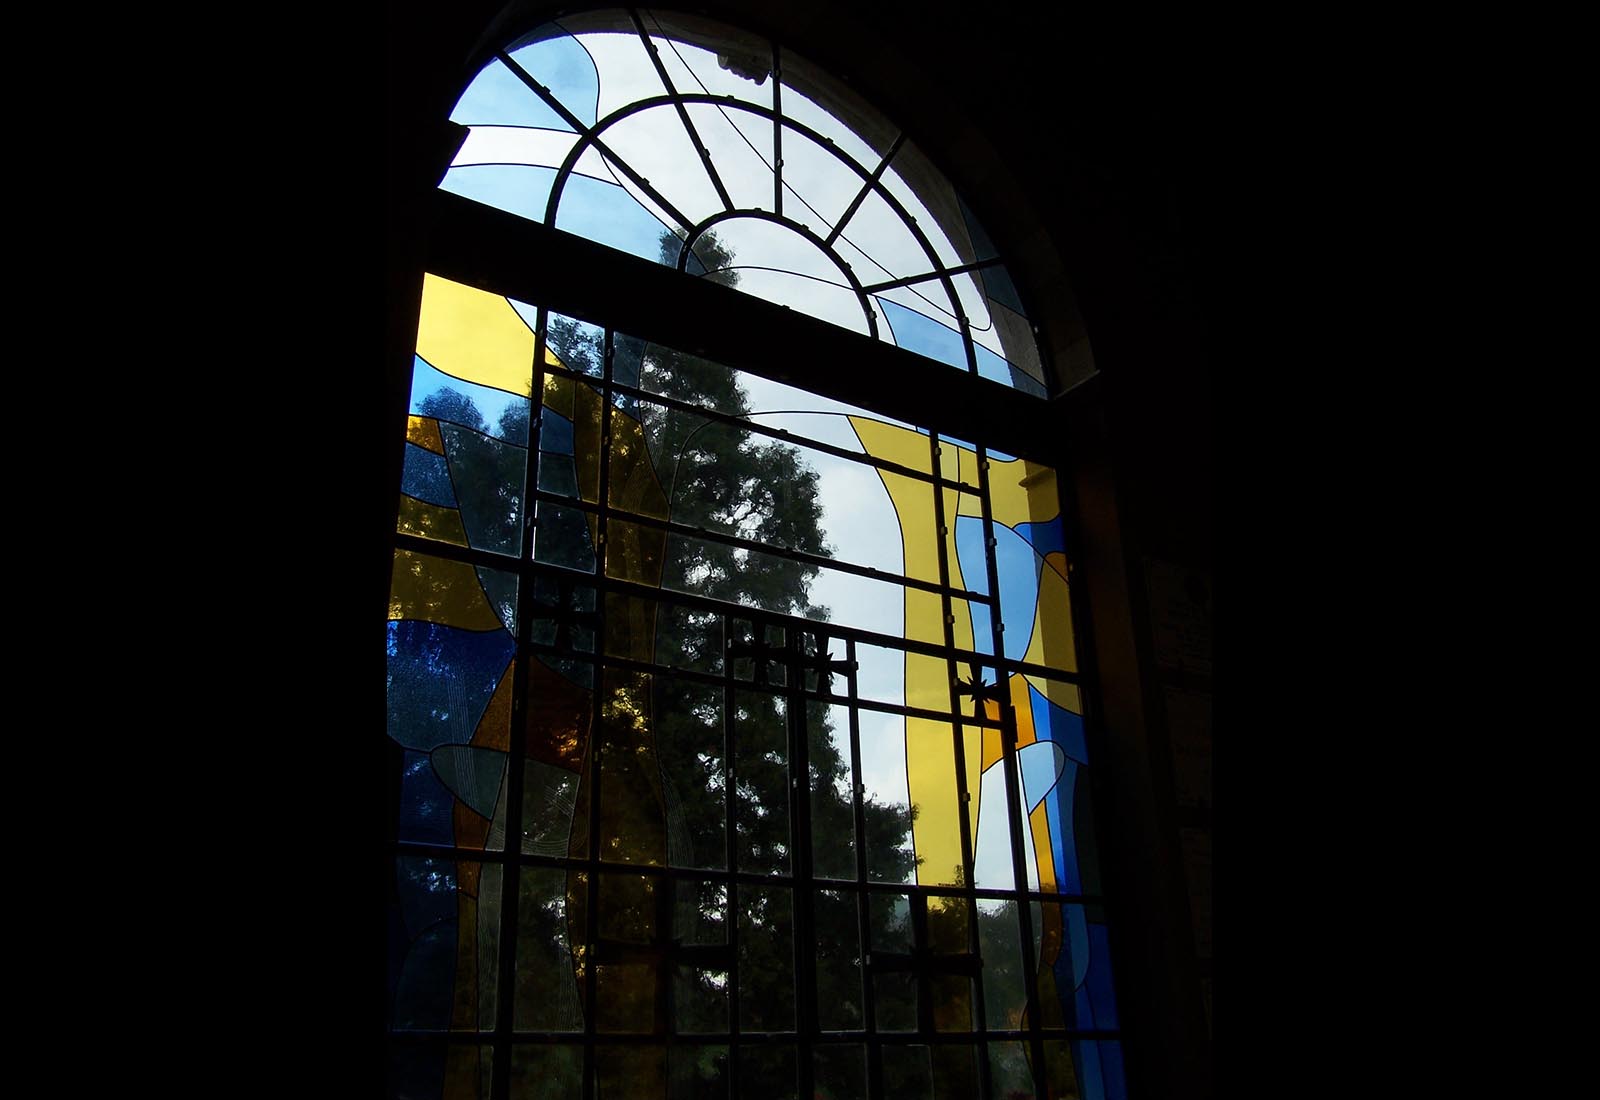 Cemetery priests chapel in Rho - The stained glass window